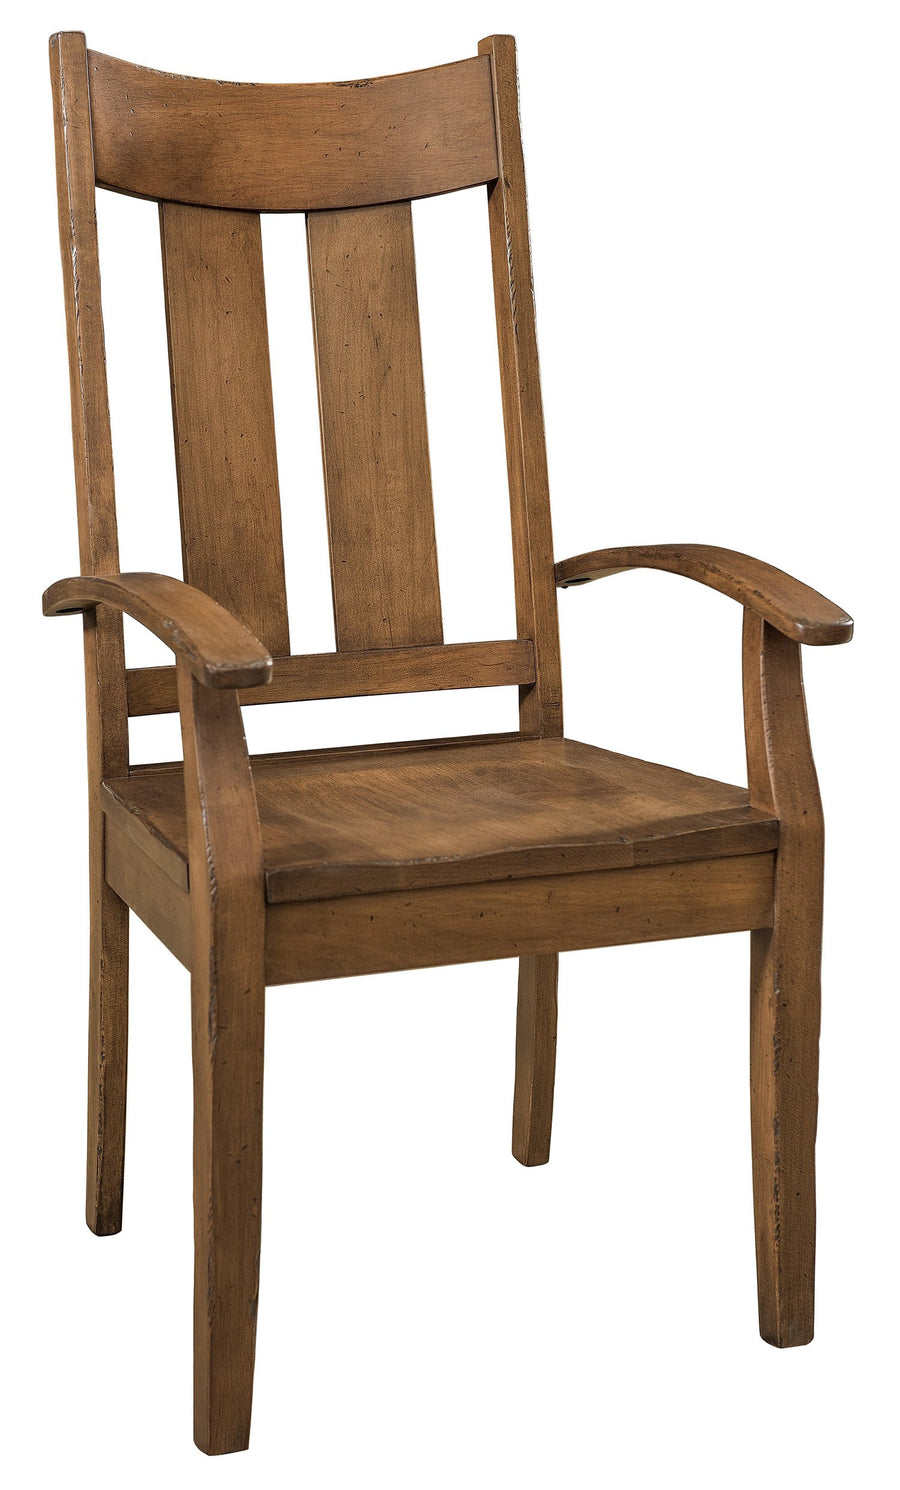 Aspen Amish Arm Chair - Foothills Amish Furniture